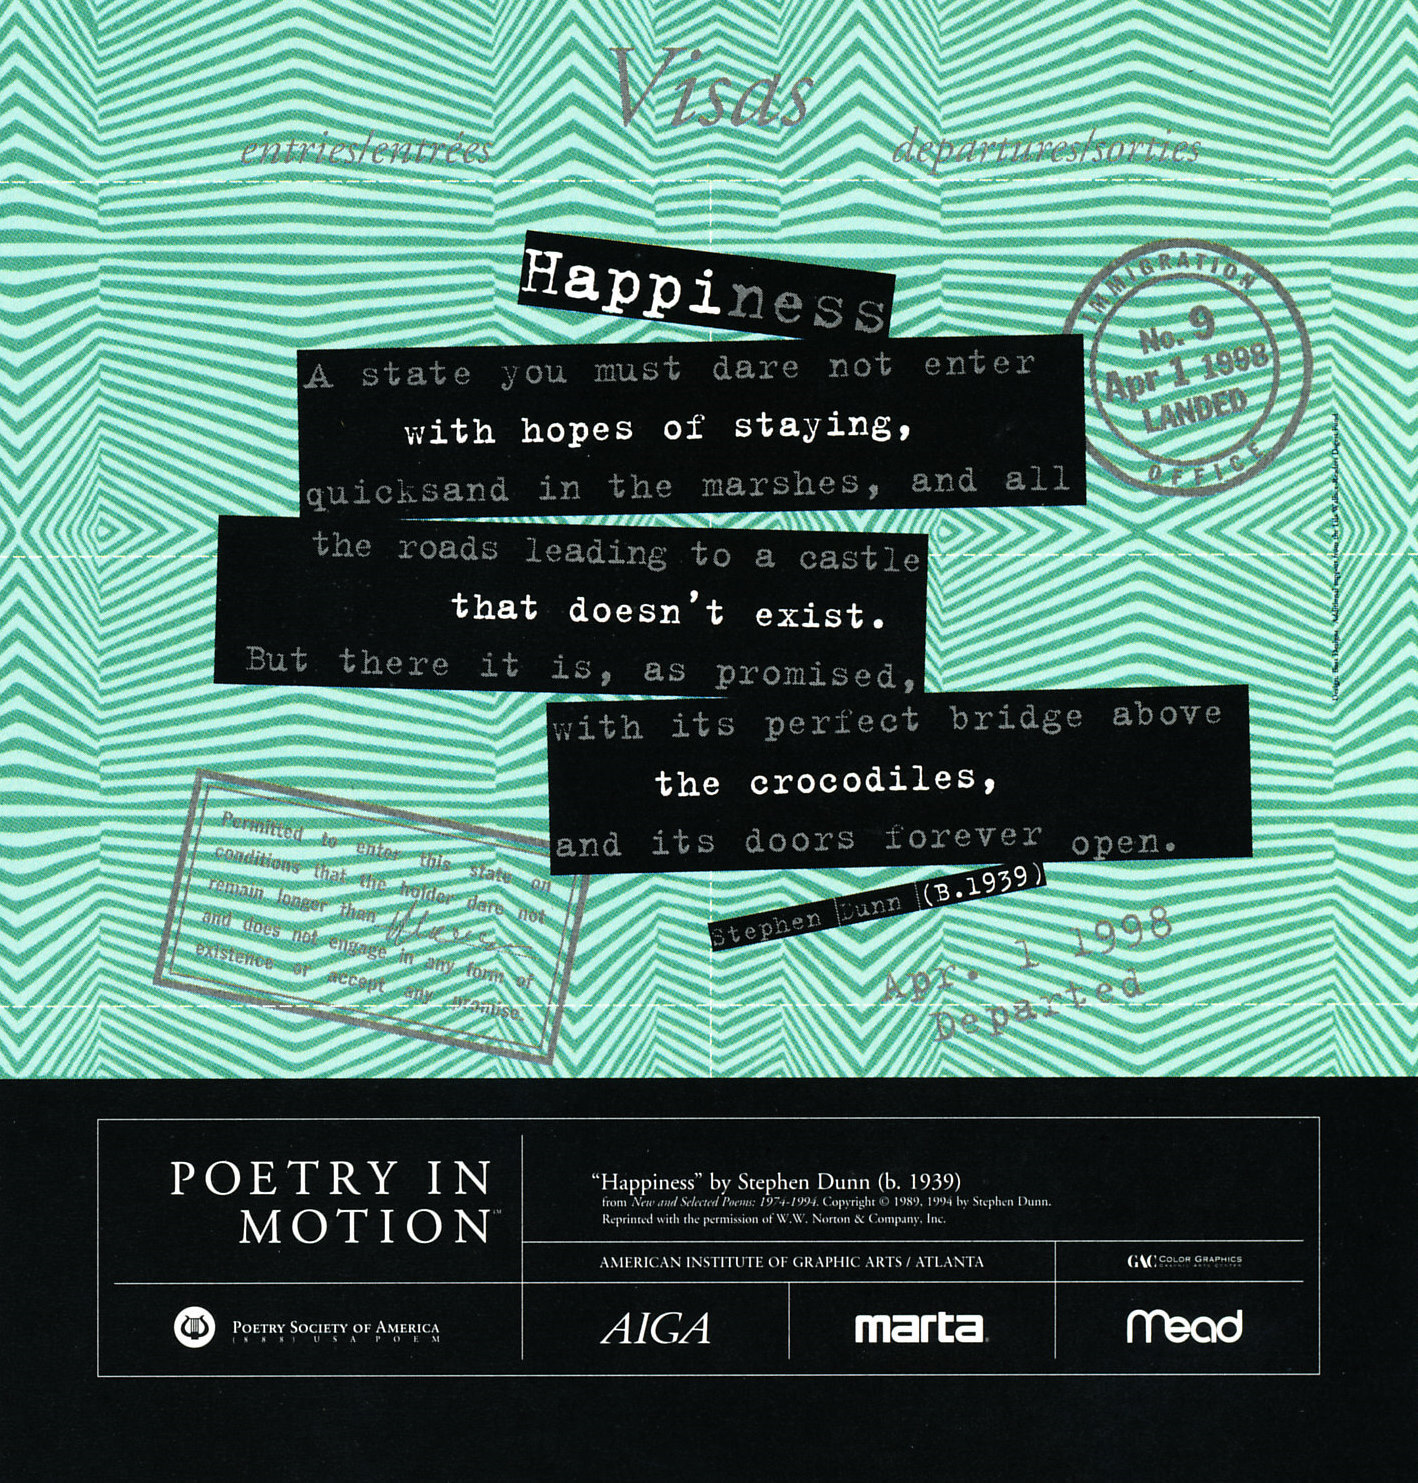 A green and white poster resembling a visa features the poem, Happiness by Stephen Dunn. The poem is written in grey and white text and is set against thick black strips.